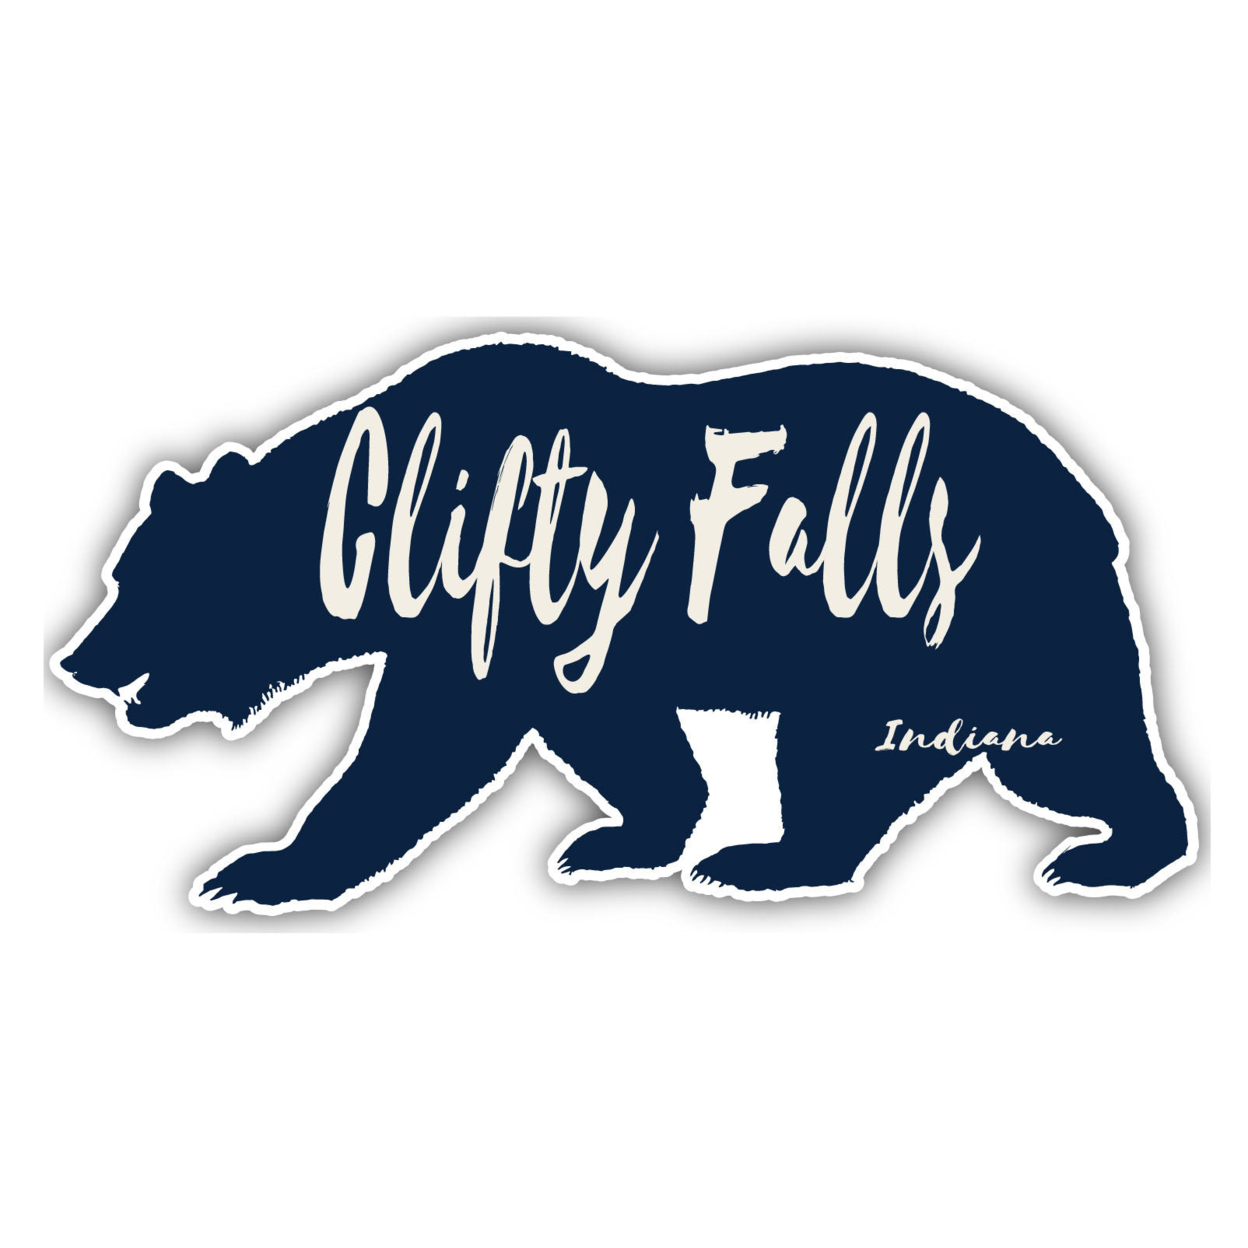 Clifty Falls Indiana Souvenir Decorative Stickers (Choose Theme And Size) - 4-Pack, 10-Inch, Great Outdoors